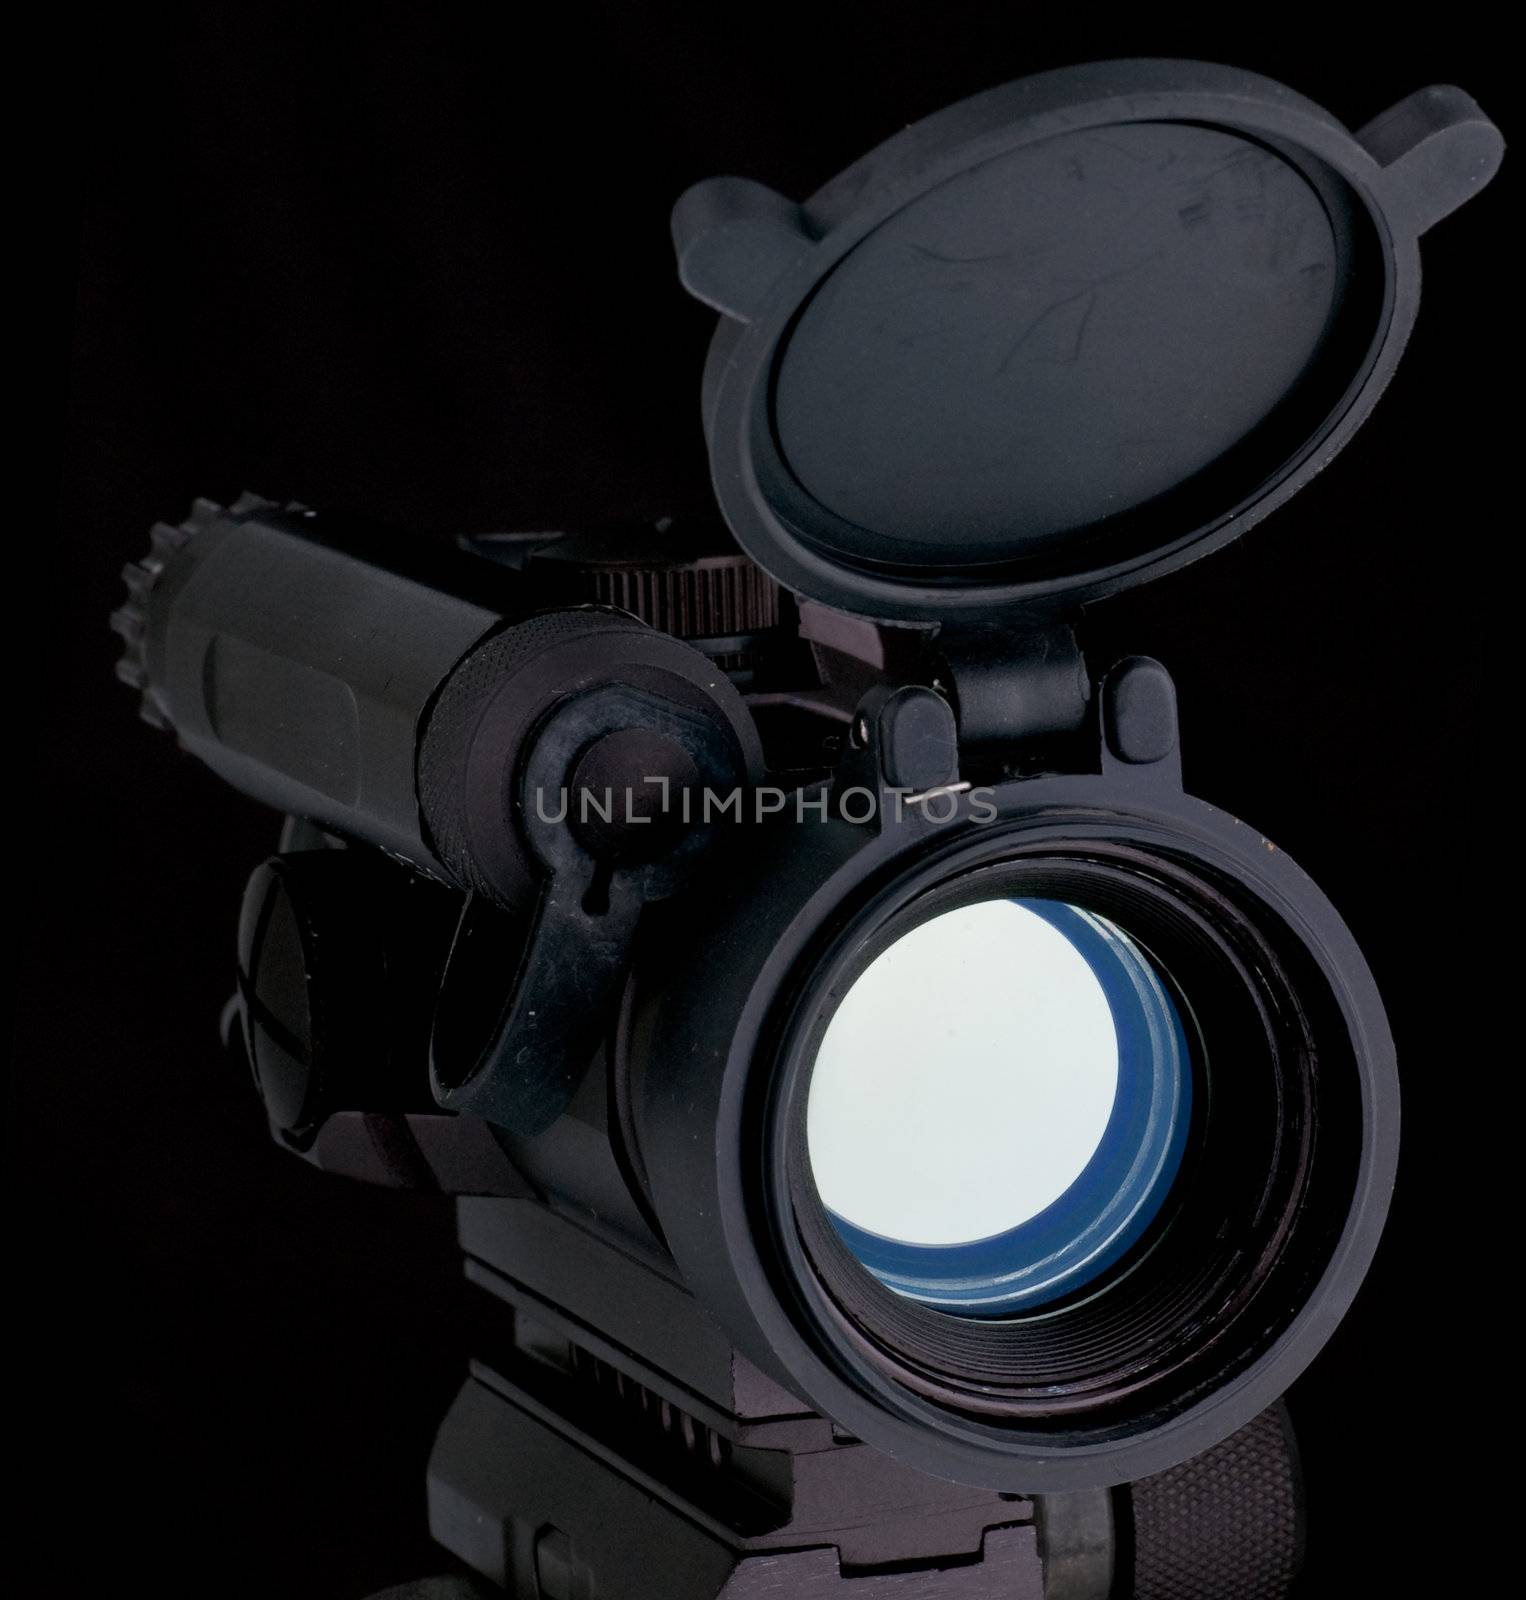 red dot scope for assault rifle on black